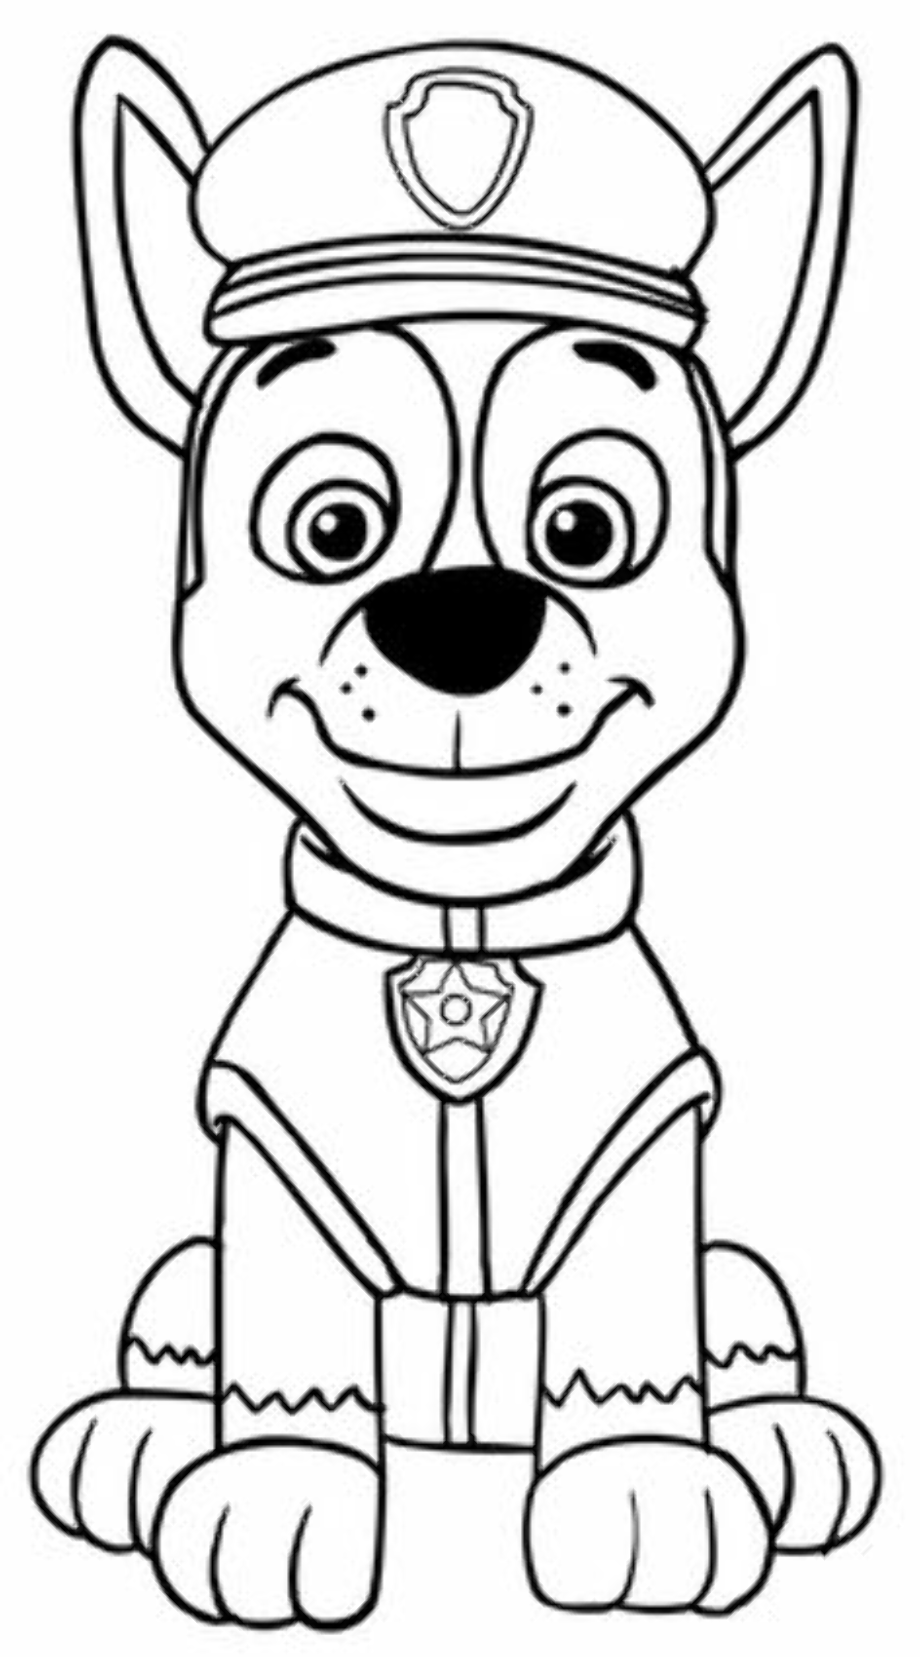 Download High Quality paw patrol clipart outline Transparent PNG Images